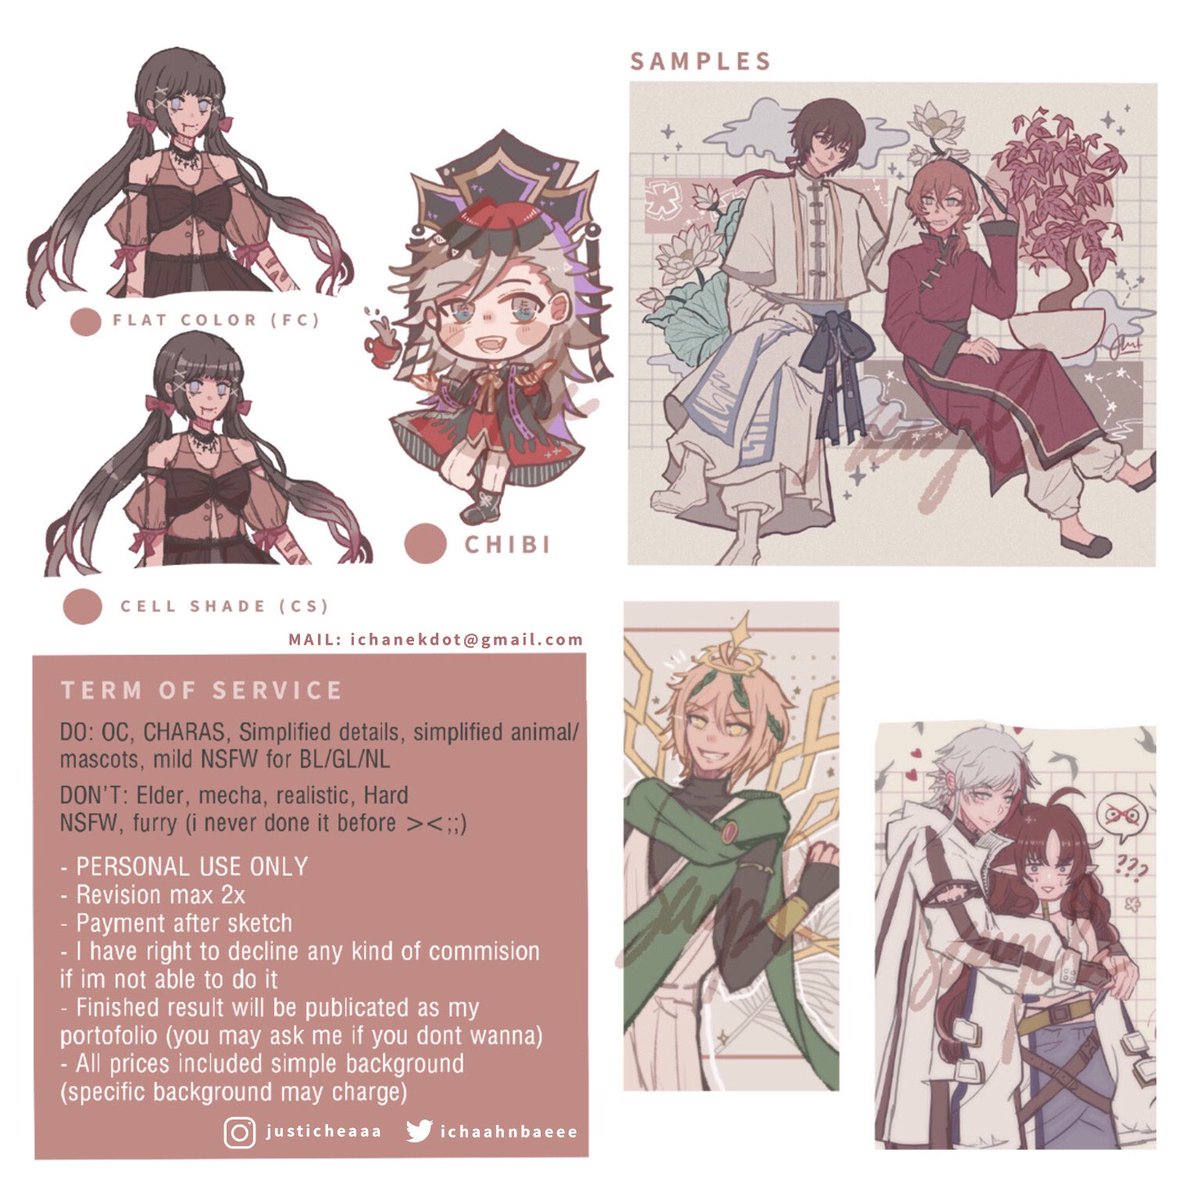 [RT are any kind of share are appreciated, thank you!]

Hello, kind of short of money and didnt get any job yet so i open commission! Also small promo for couple order, its 45 usd for half body FC and 80 usd for full FC! Thank you very much for the spread ???????? 